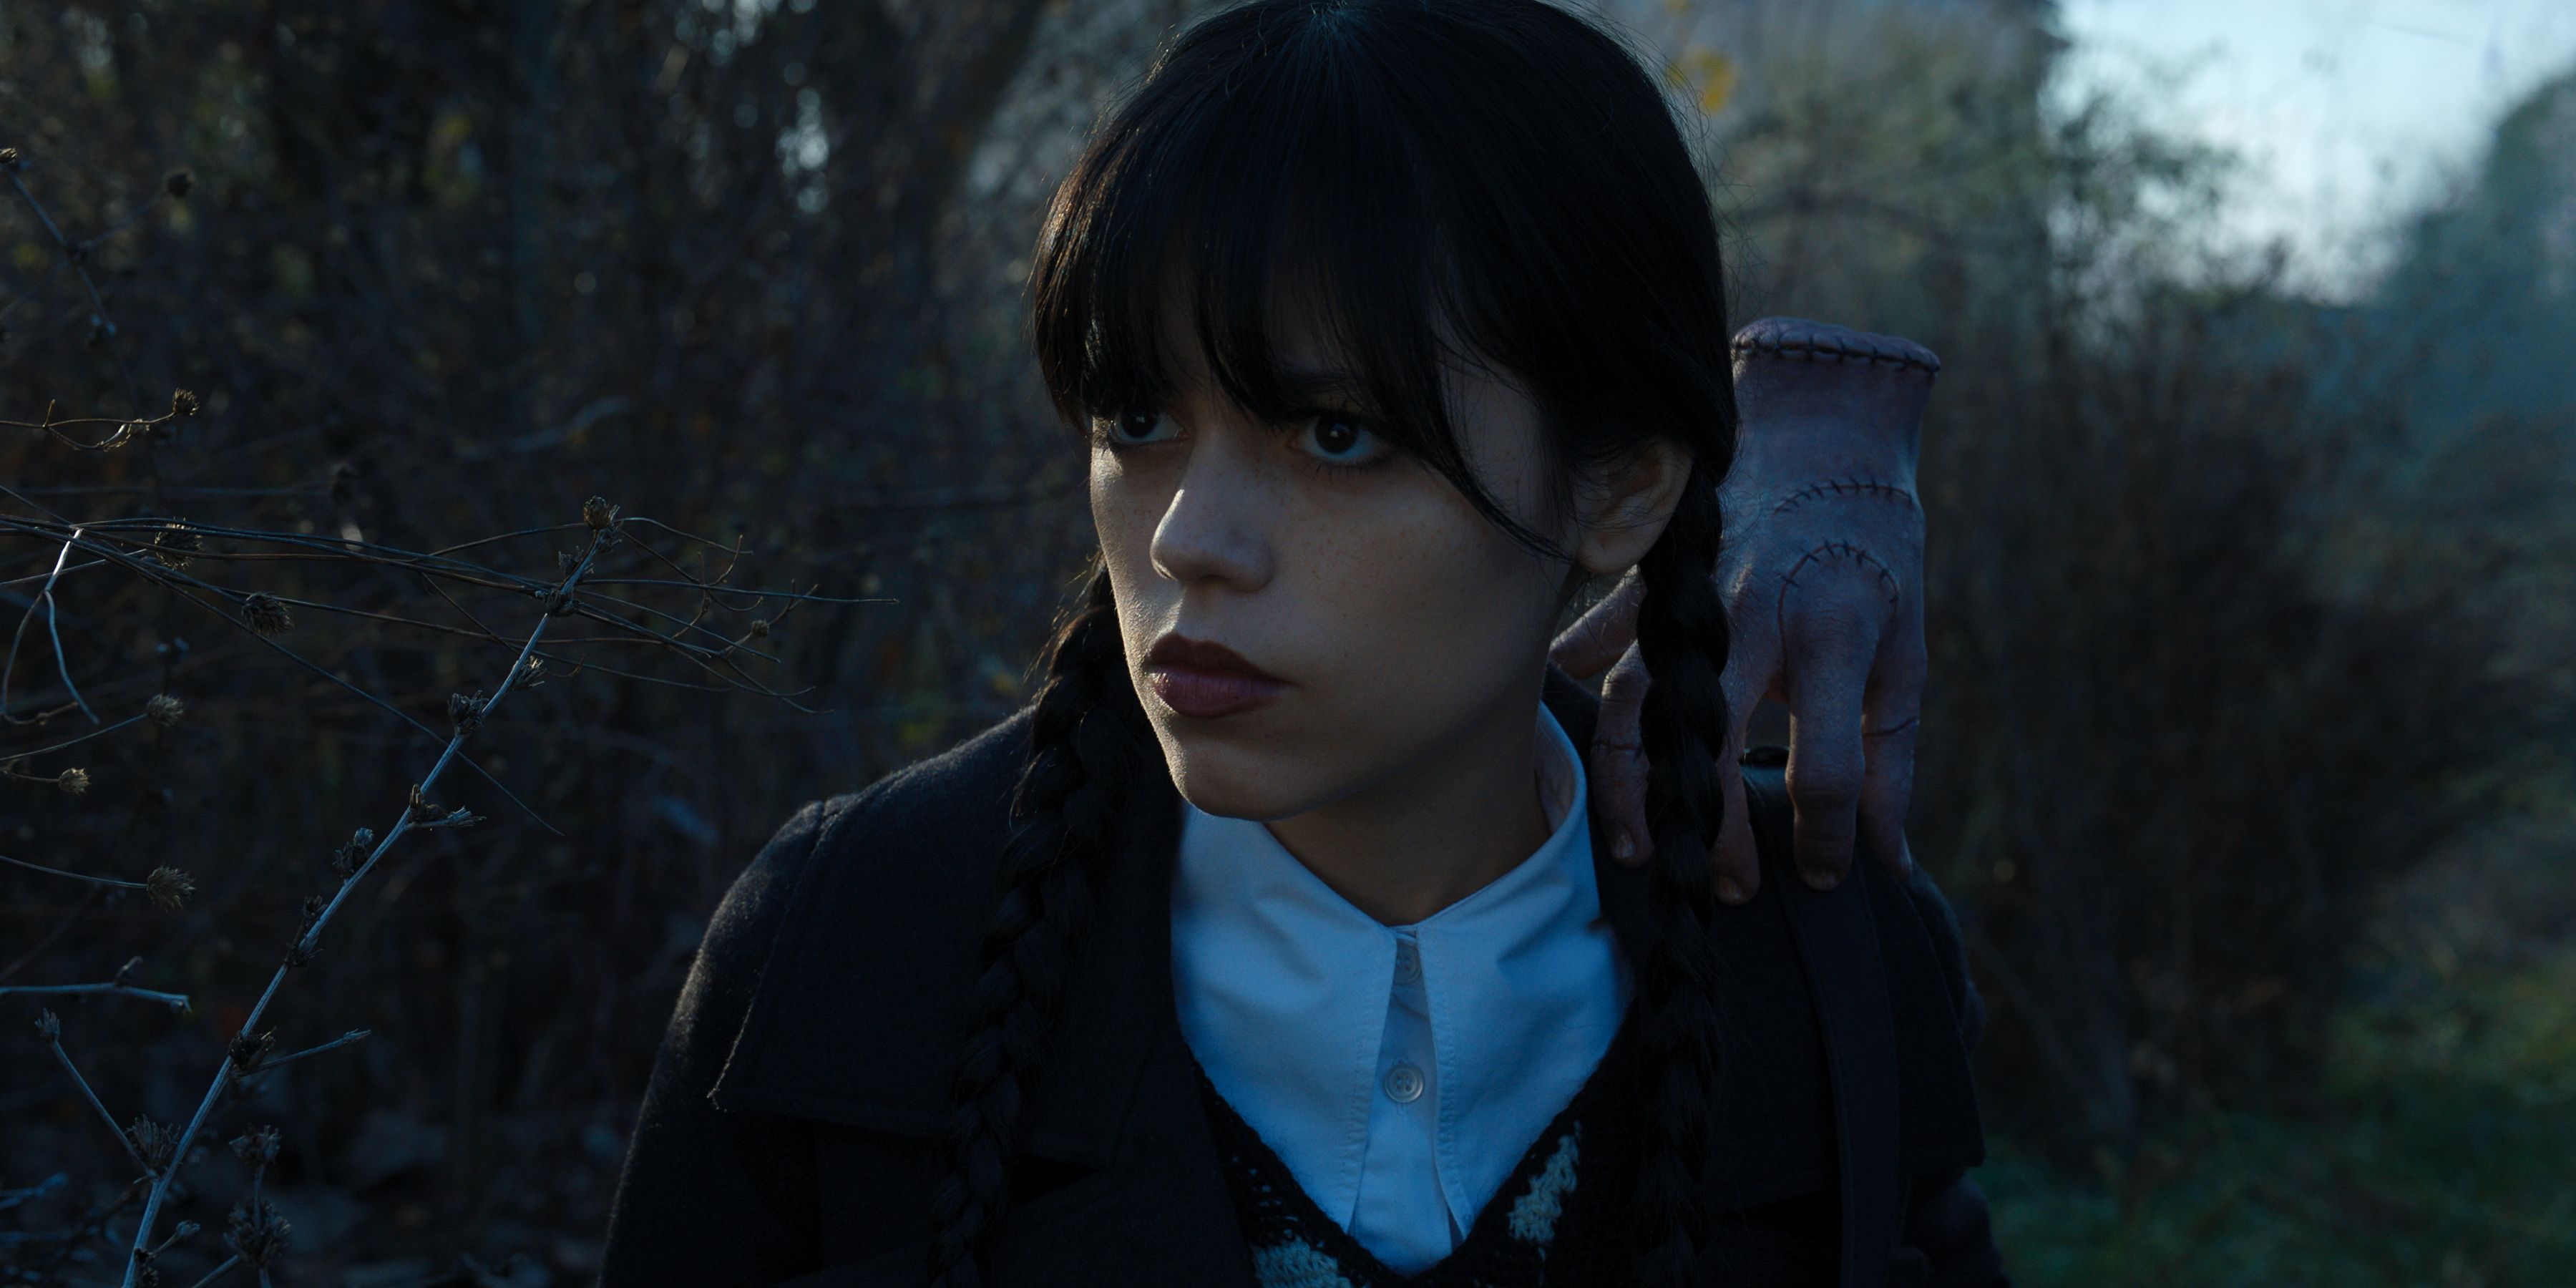 How to Get Jenna Ortega's Viral Wednesday Addams Makeup From Netflix's  Wednesday